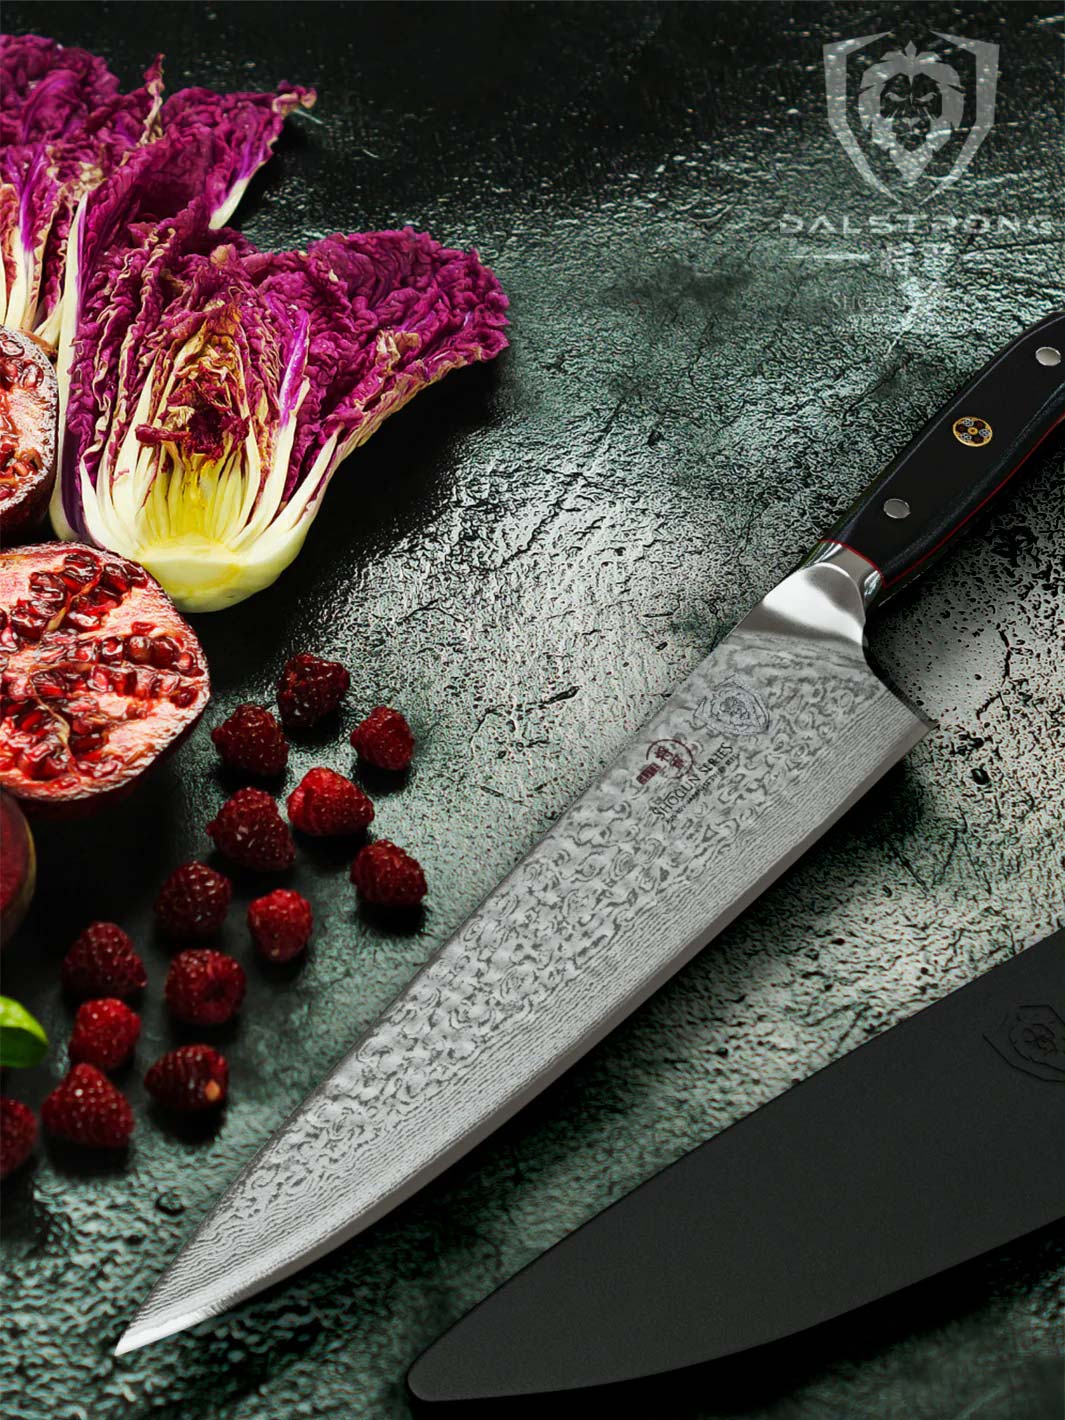 Dalstrong Small Chef's Knife - Shogun Series x Gyuto - AUS-10V (Vacuum Treated) - Hammered Finish - 6 inch - W/Guard Sheath